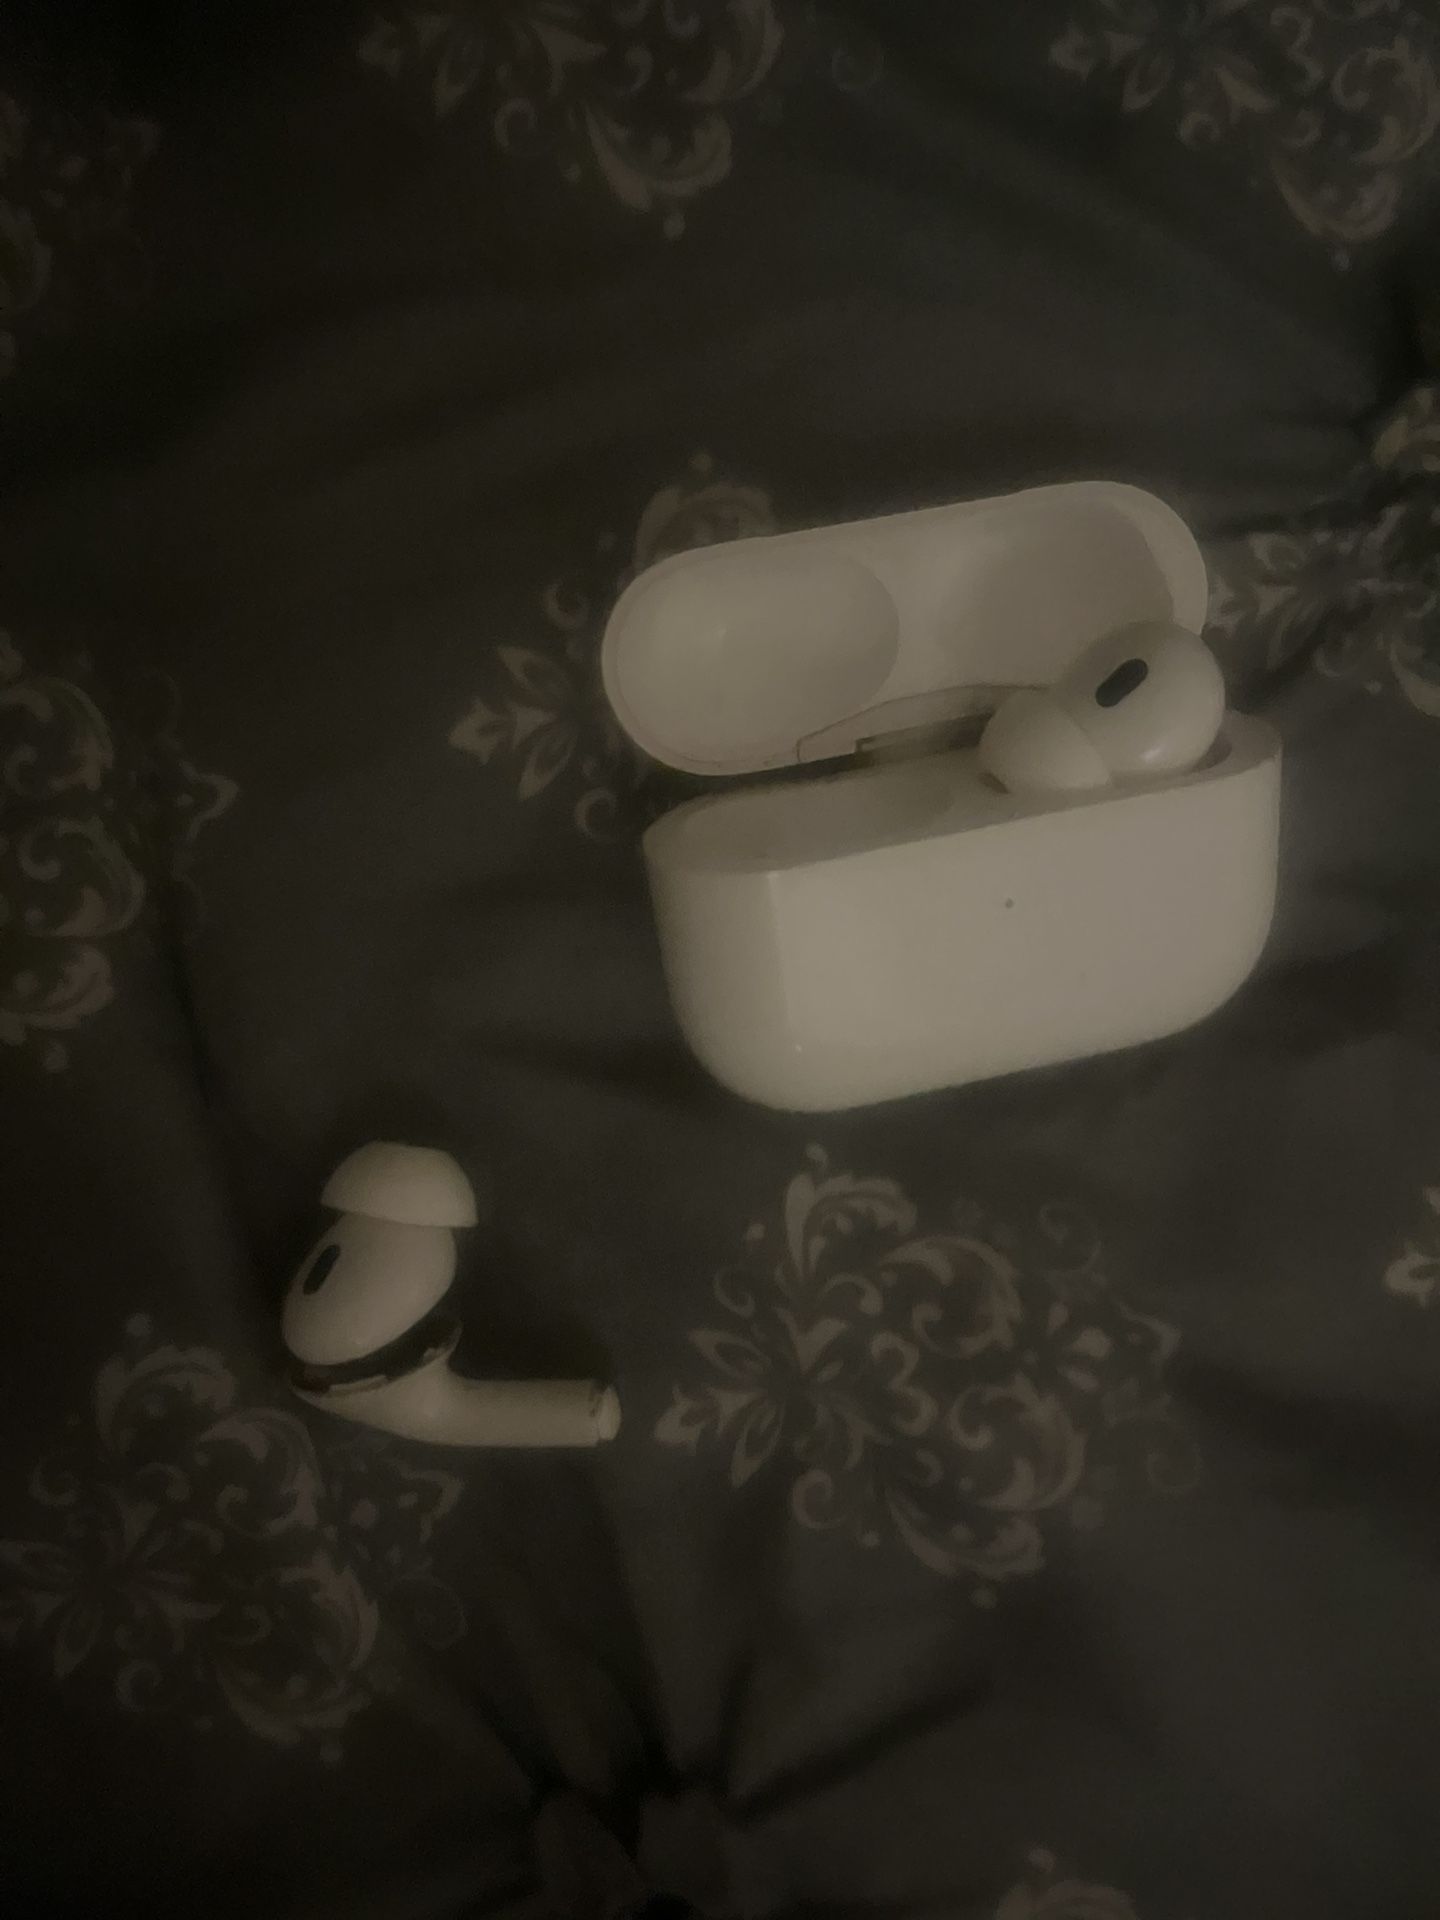 Selling One Airpod